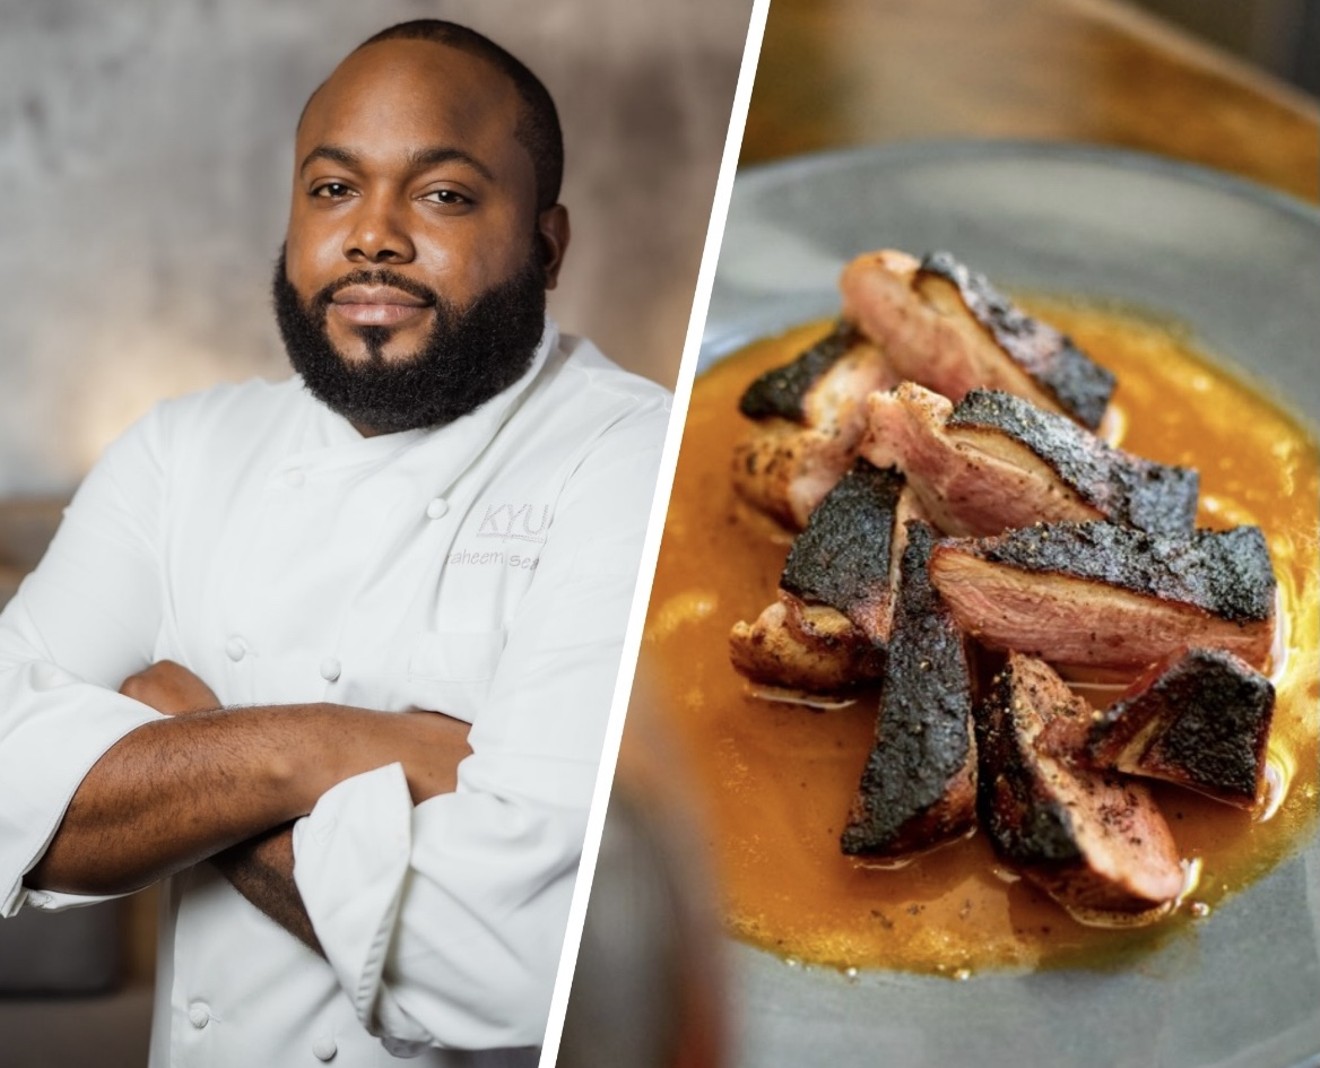 This year Kyu executive chef Raheem Sealey will open the brand's third location — in New York City.